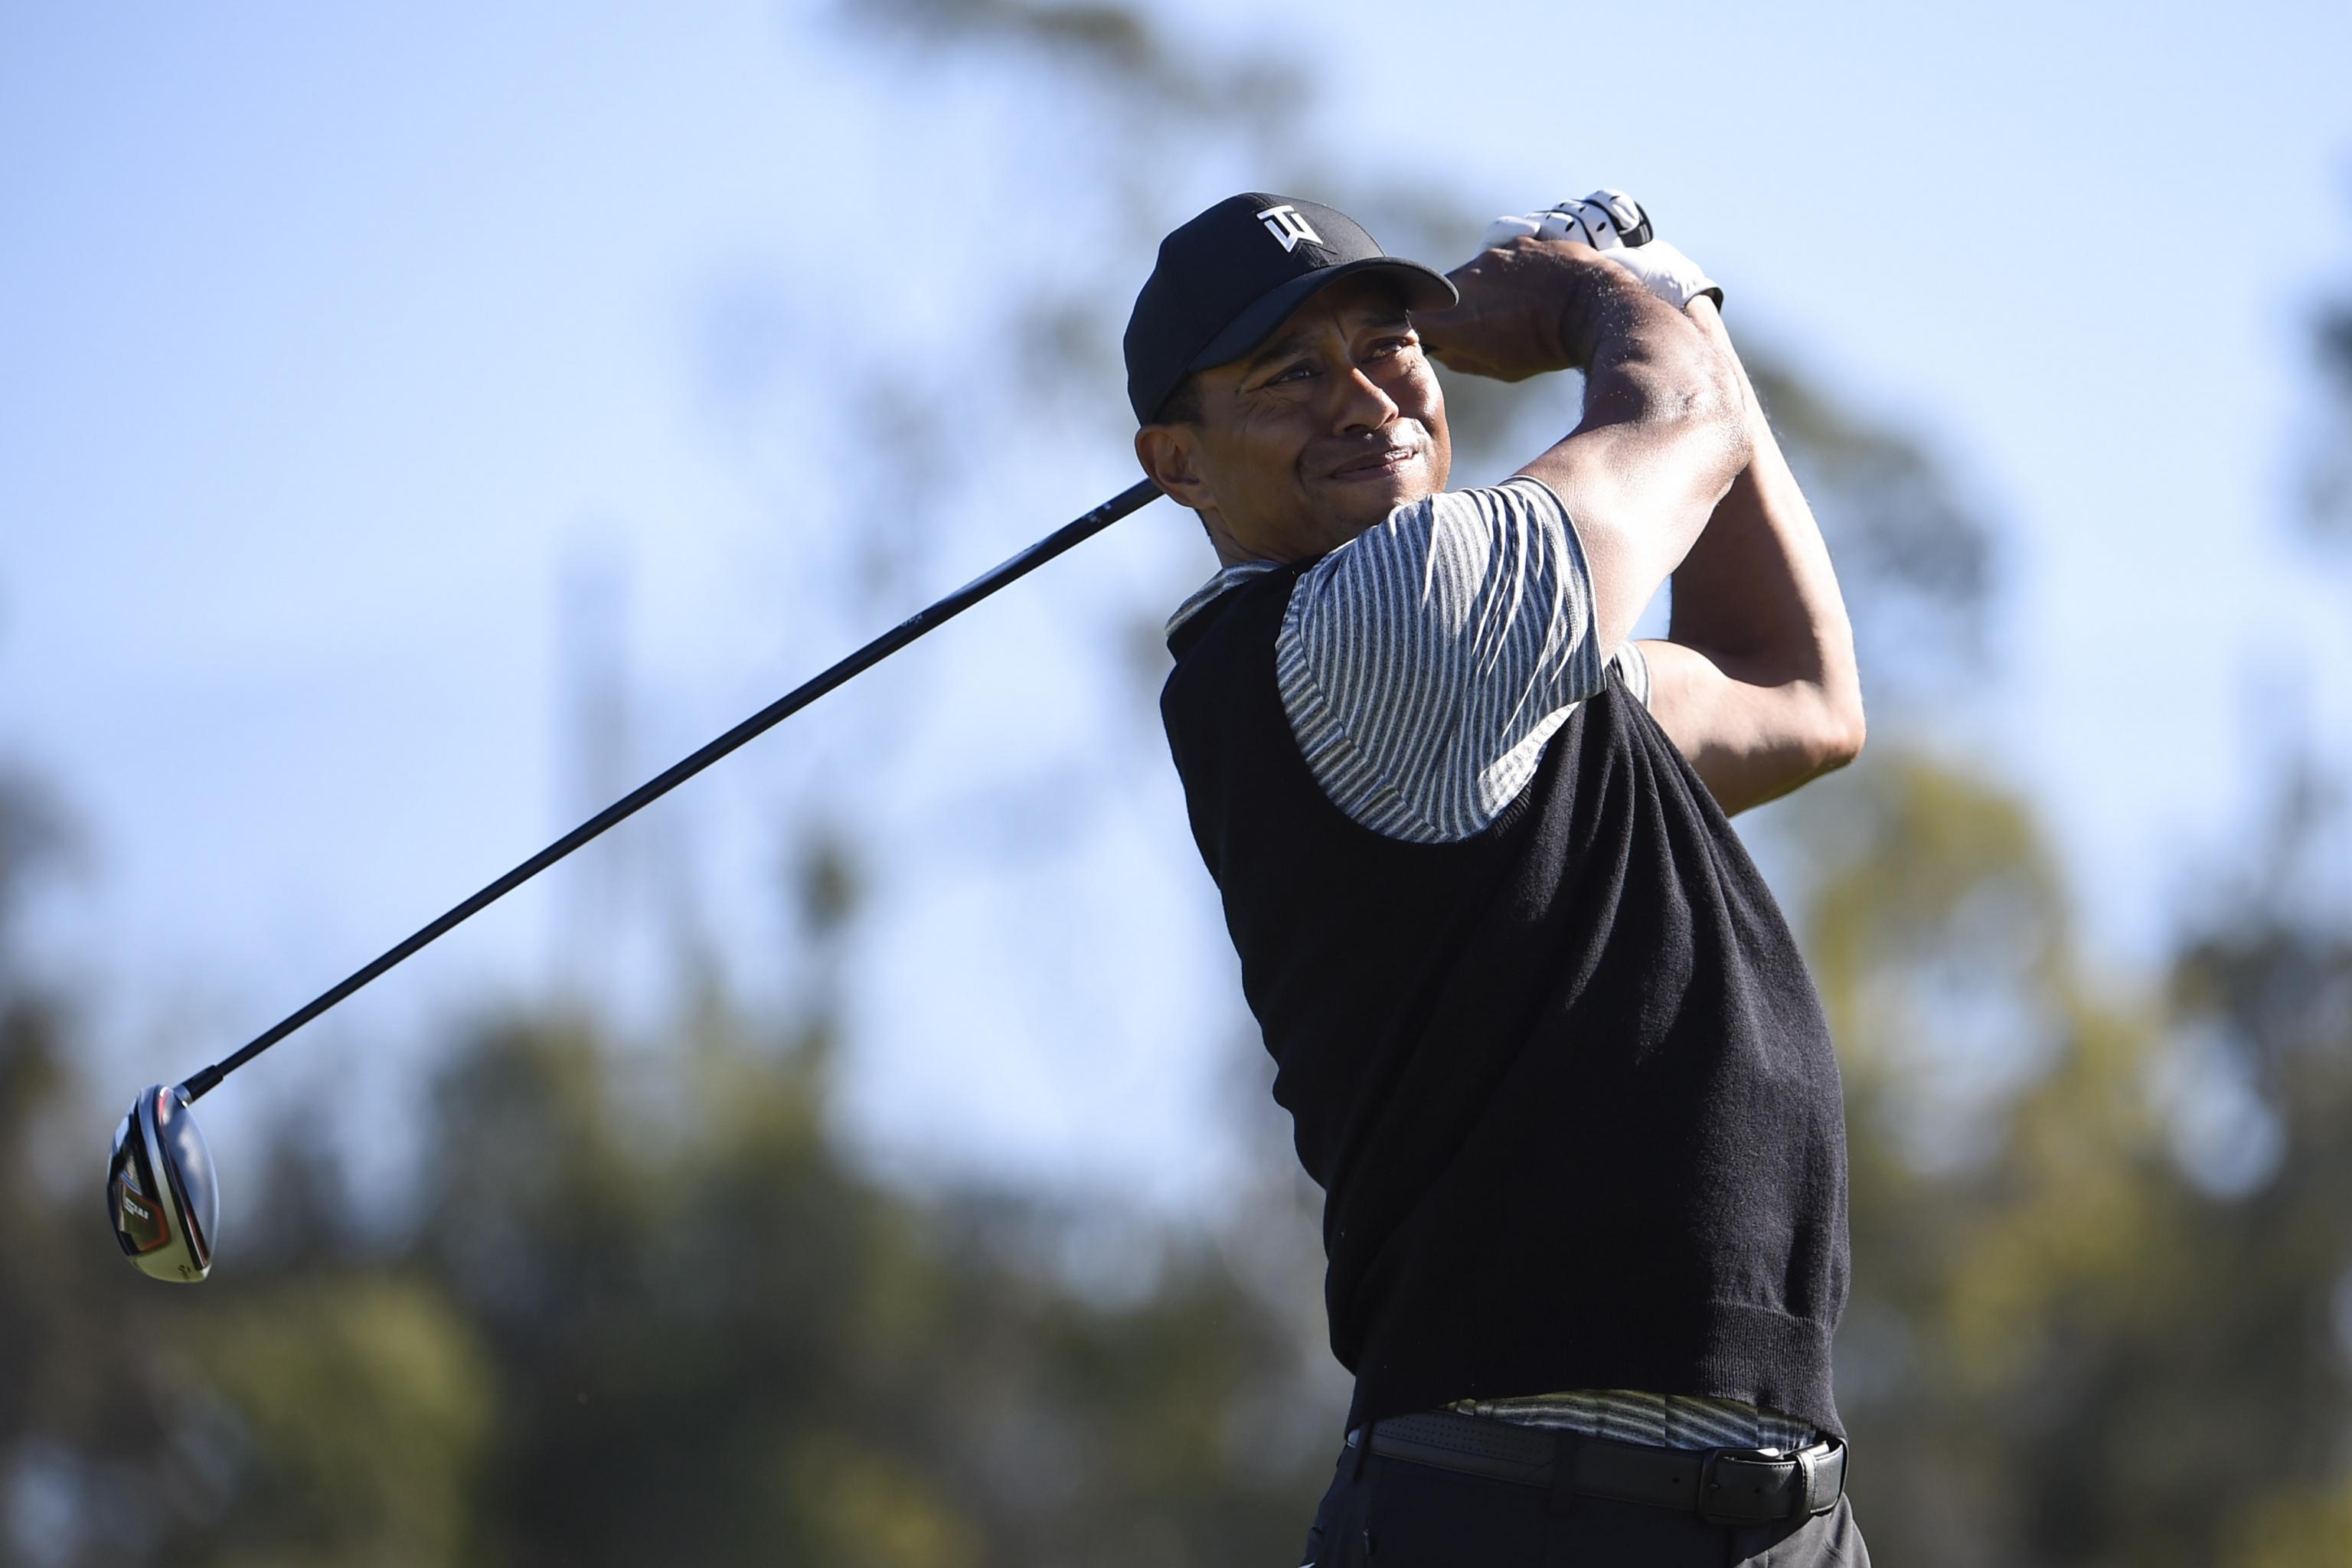 Tiger Woods Makes Cut After Shooting 2 Under Friday At Farmers Insurance Open Bleacher Report Latest News Videos And Highlights